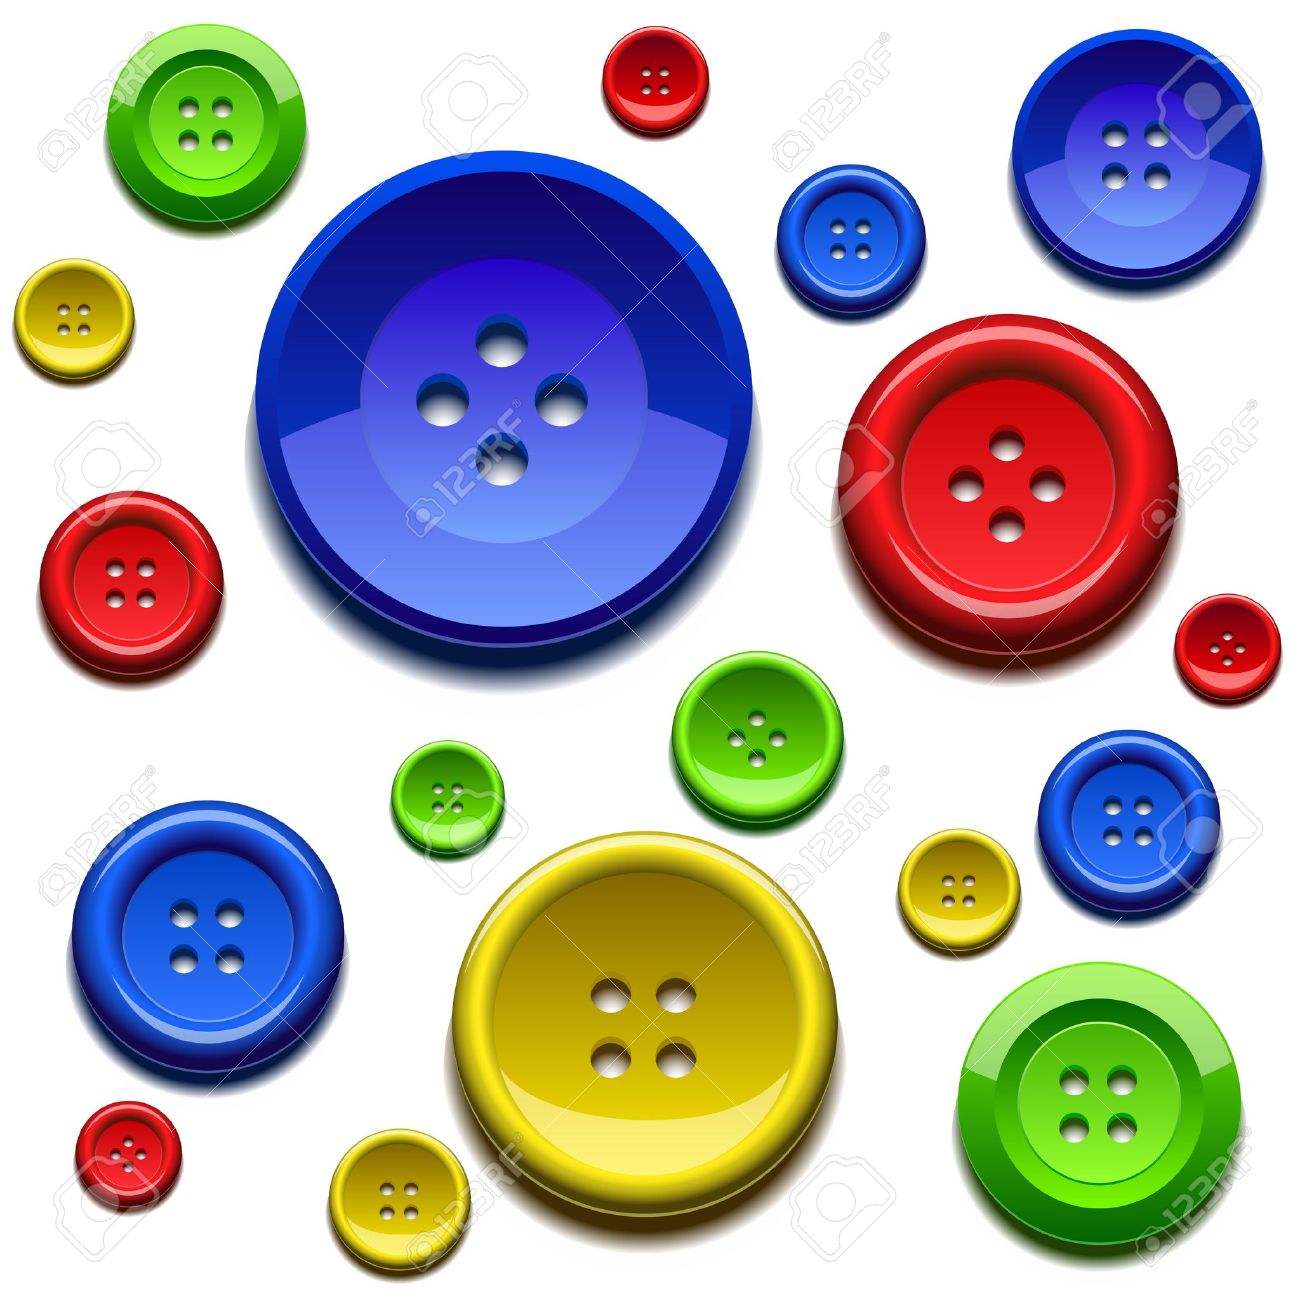 Sewing Buttons Clipart Free Images At Clker Com Vector Clip Art | My ...